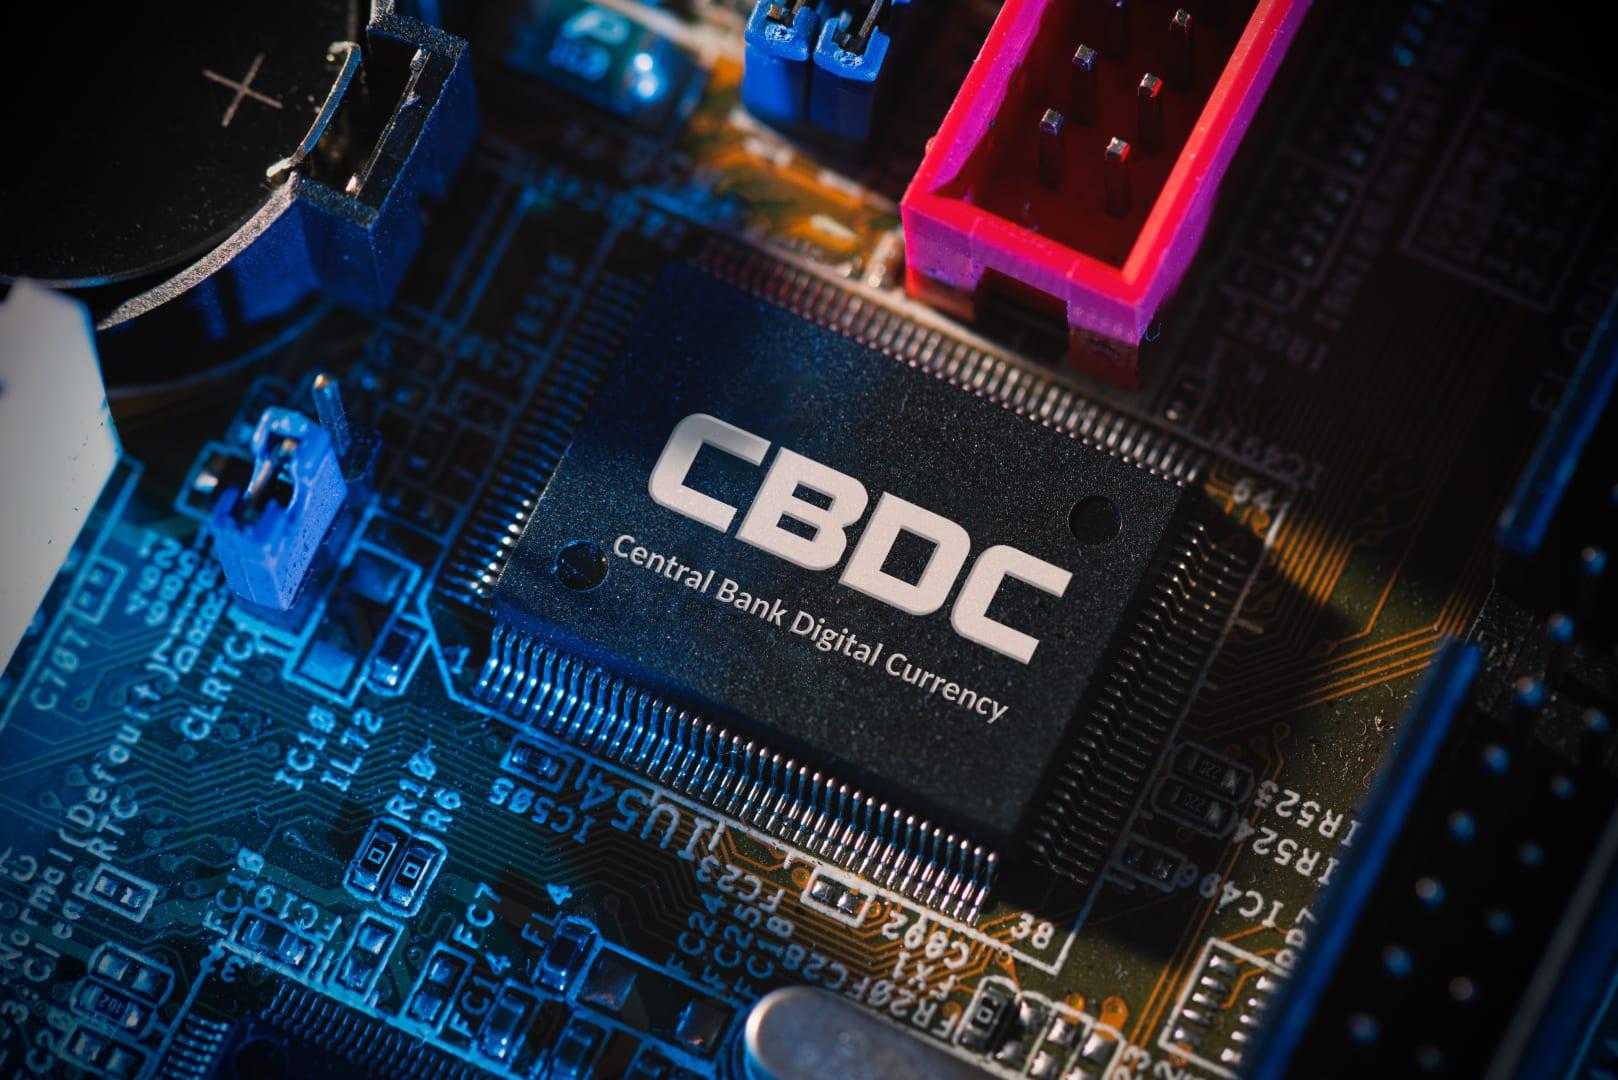 White House directs government to further explore CBDC technology